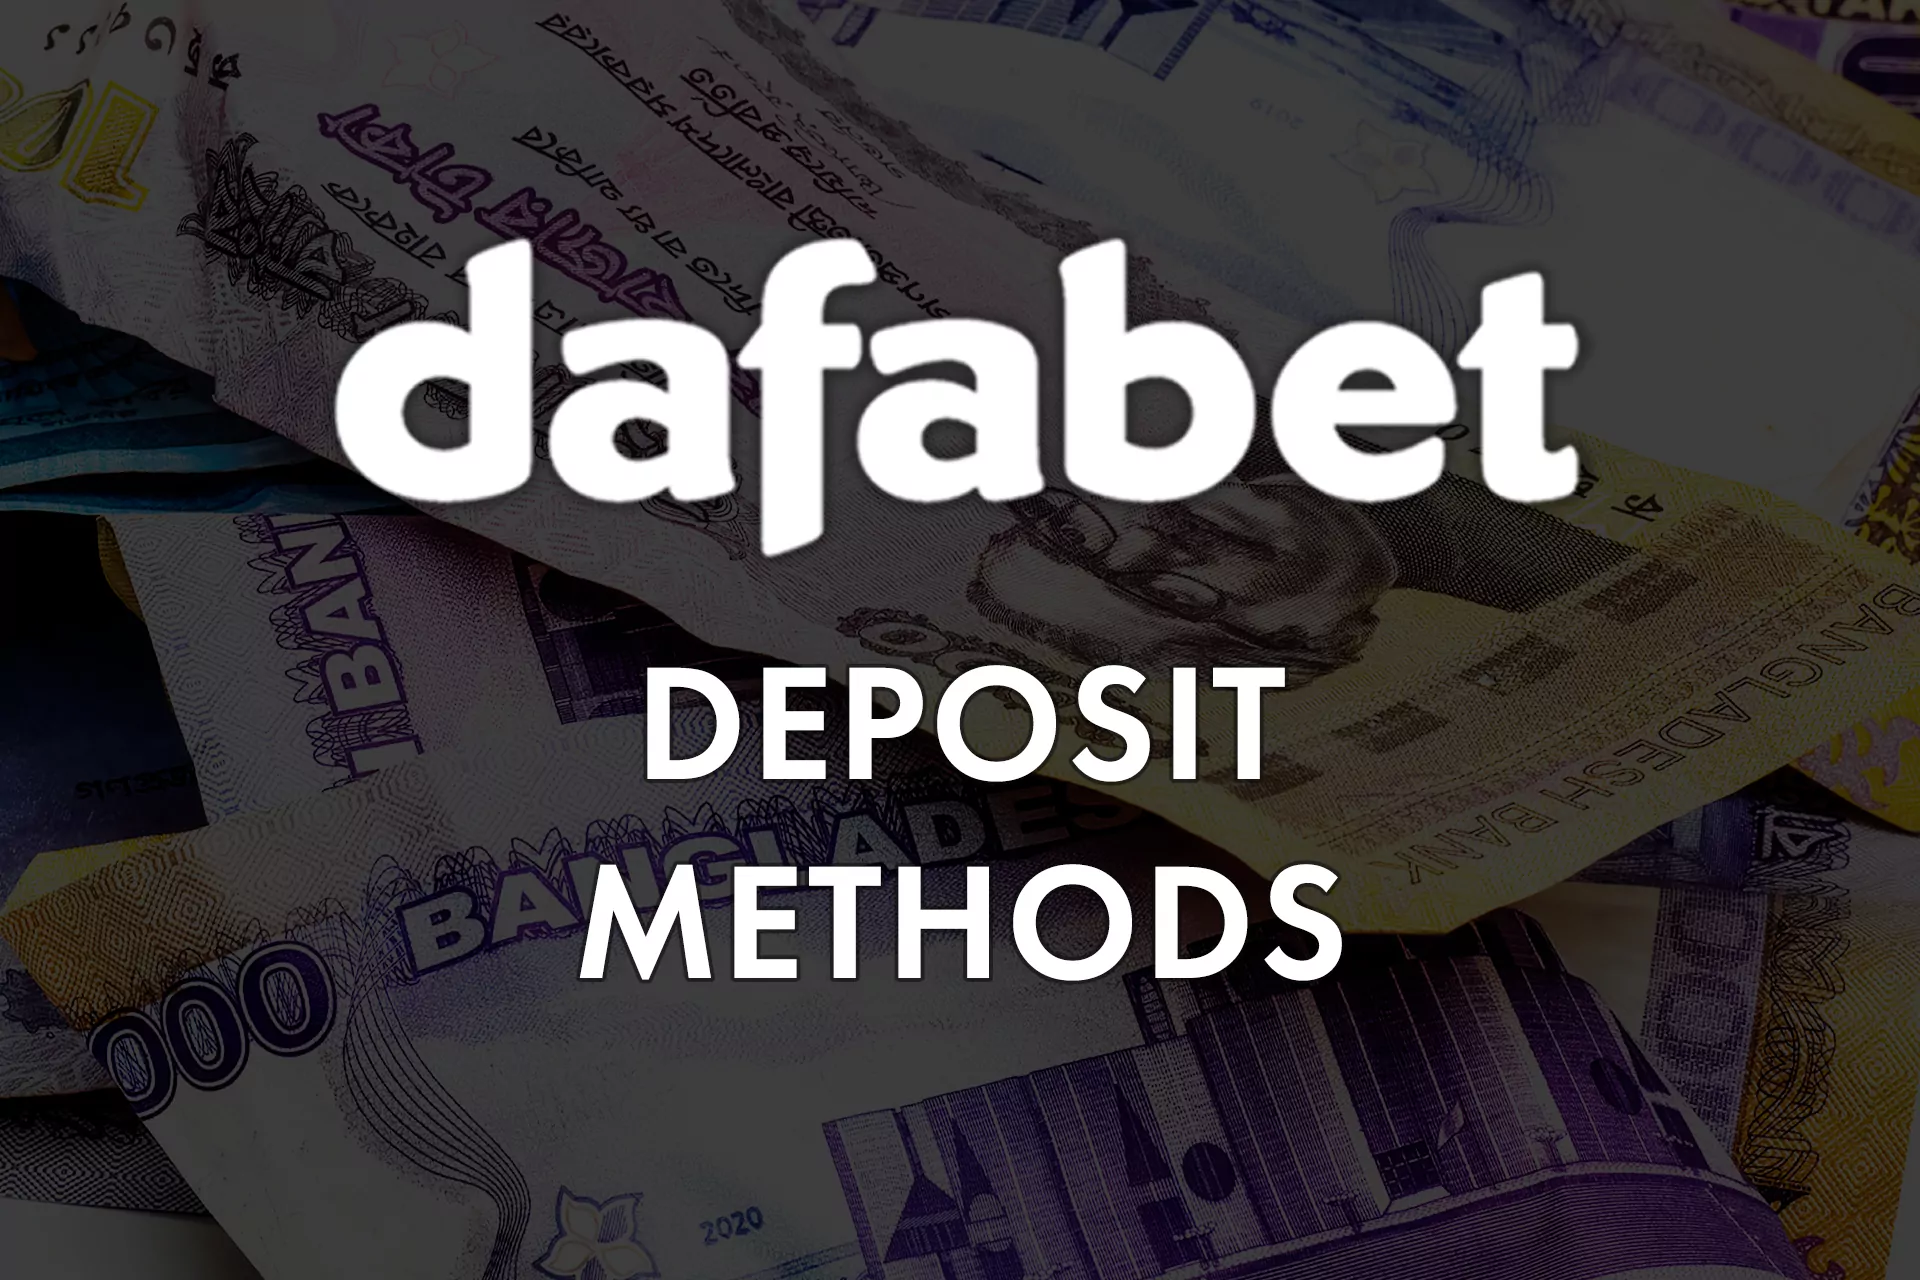 The bookmaker of Dafabet uses the most popular worldwide payment methods like transferring from bank cards or e-wallets.